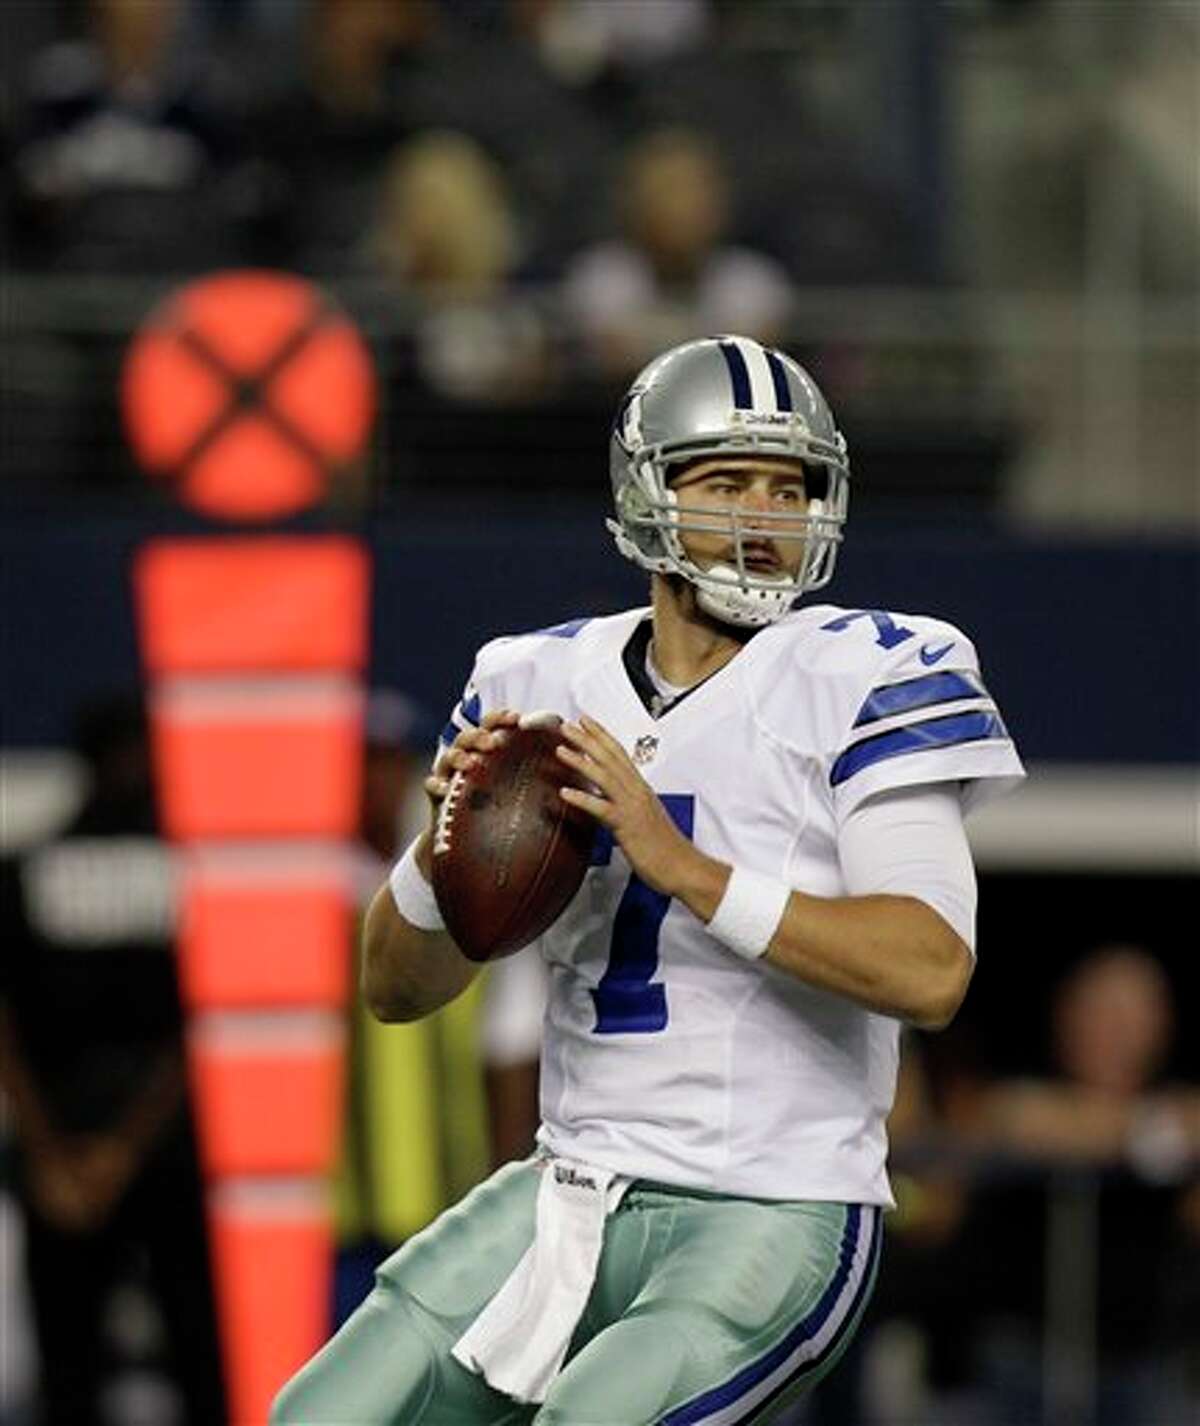 Dallas Cowboys' Stephen McGee (7) passes in the first half of a preseason NFL football game against the Miami Dolphins Wednesday, Aug. 29, 2012, in Arlington, Texas. (AP Photo/LM Otero)